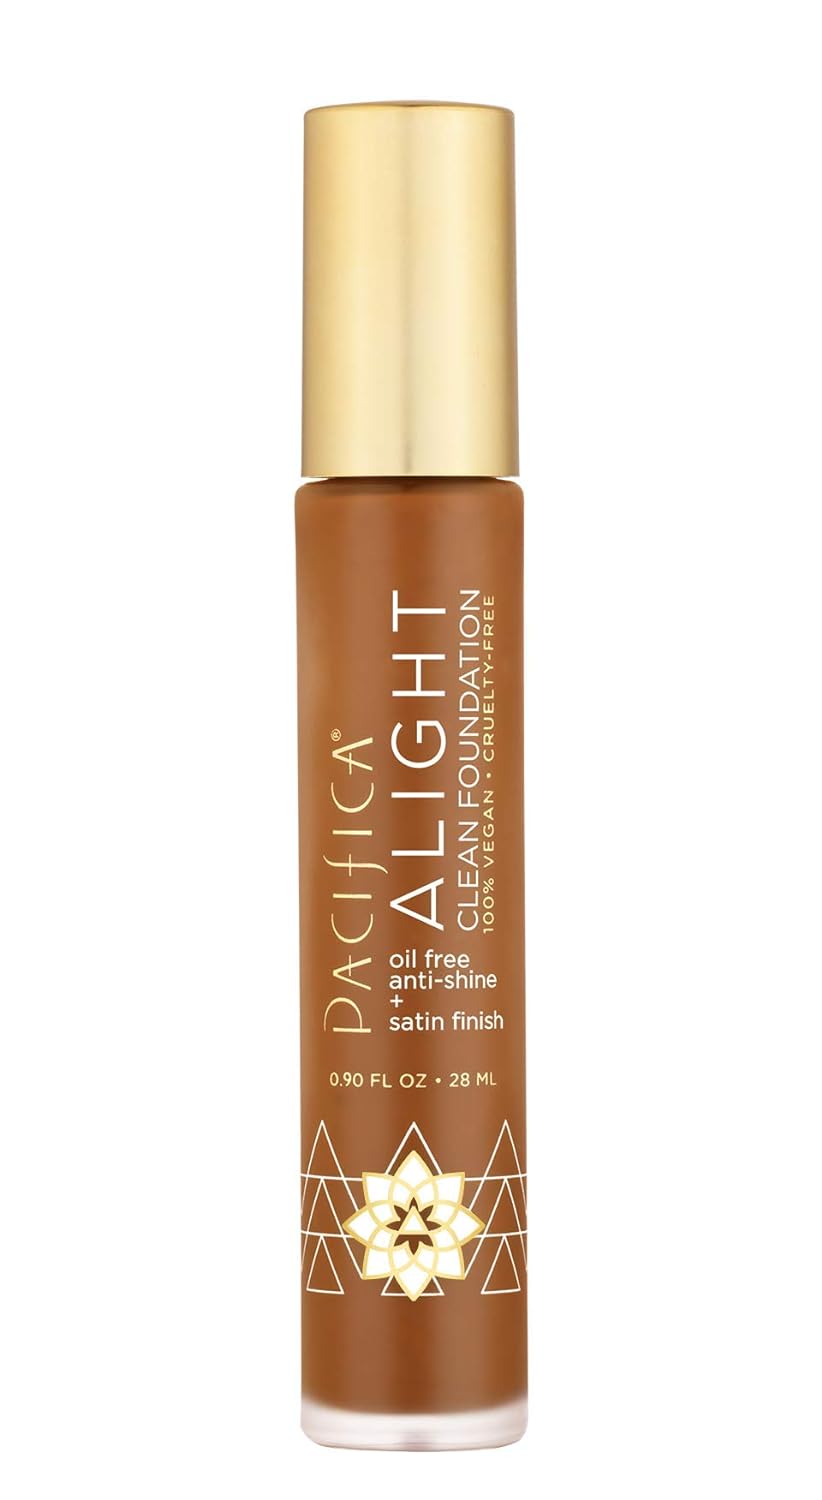 Pacifica Beauty Alight Clean Cool Foundation, Deep, 04CD, 0.9